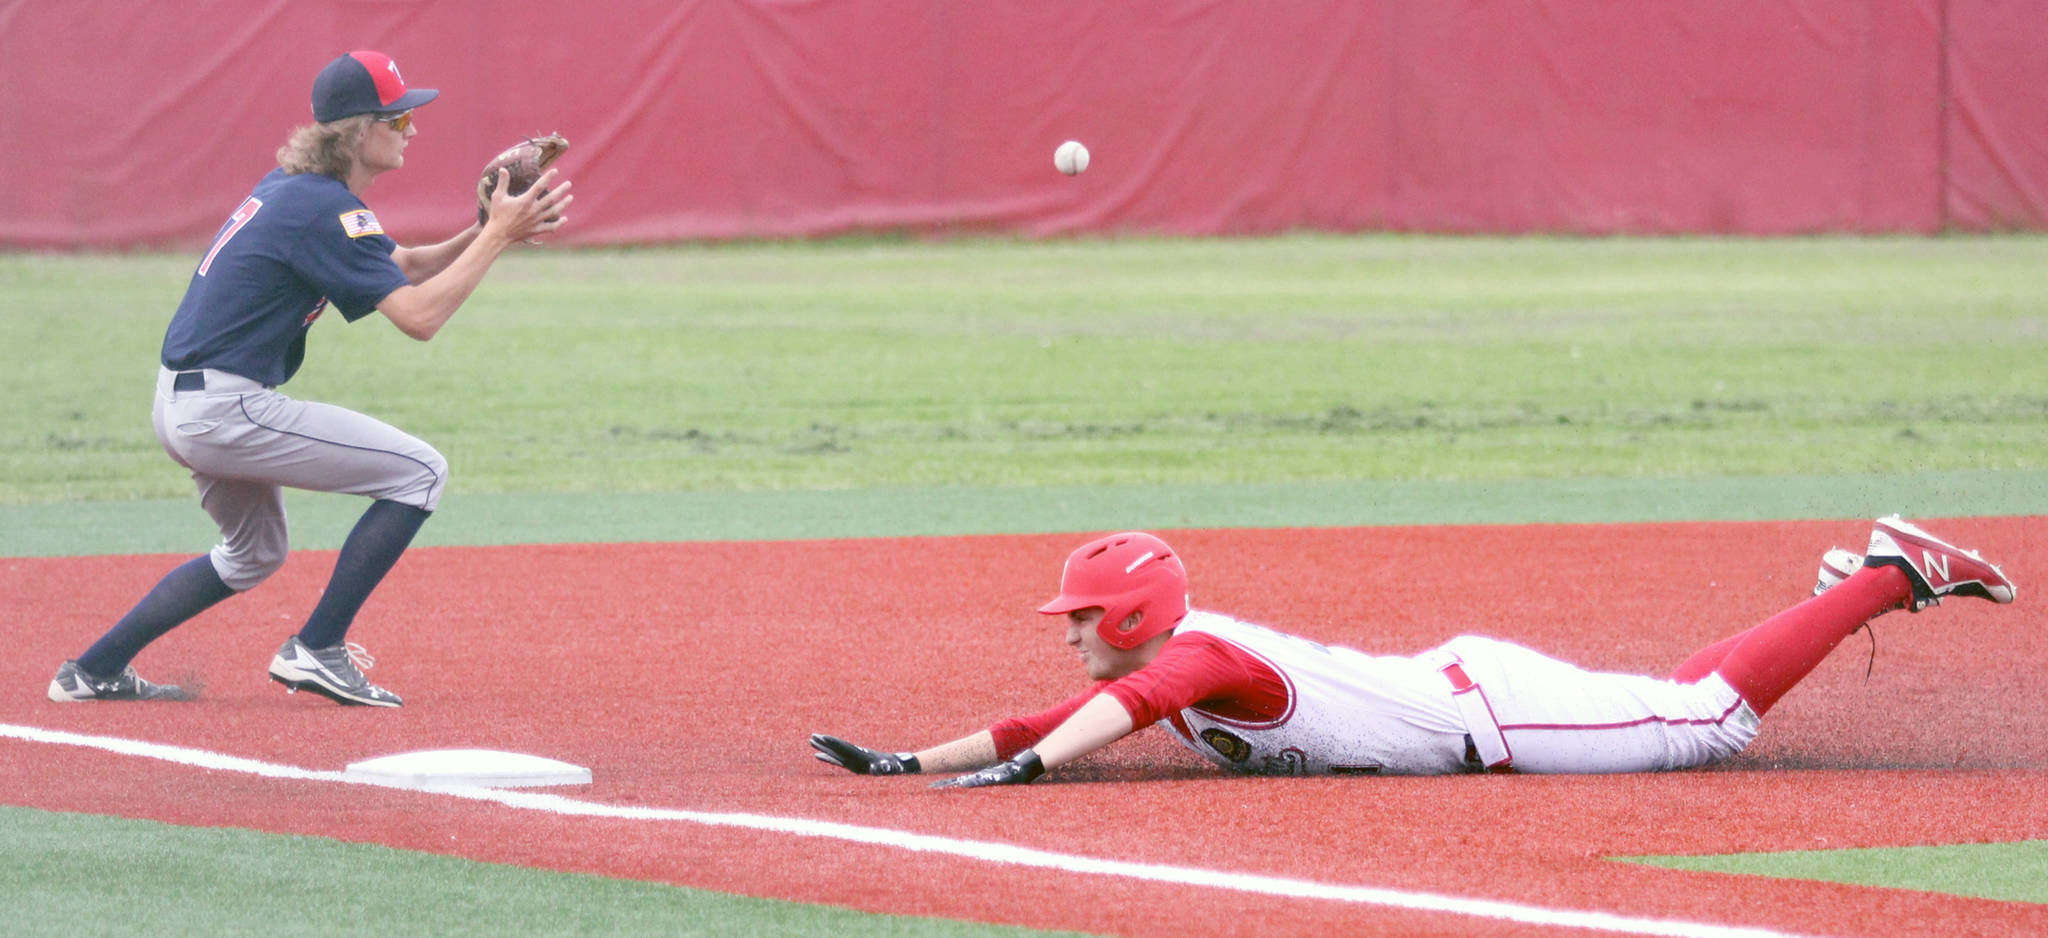 Kenai infielder Davey Belger catches a throw from right field as Wasilla’s Kyle Graham slides into third during a doubleheader at Wasilla High School on Saturday, June 15, 2019. (Photo by Jeremiah Bartz/Frontiersman)